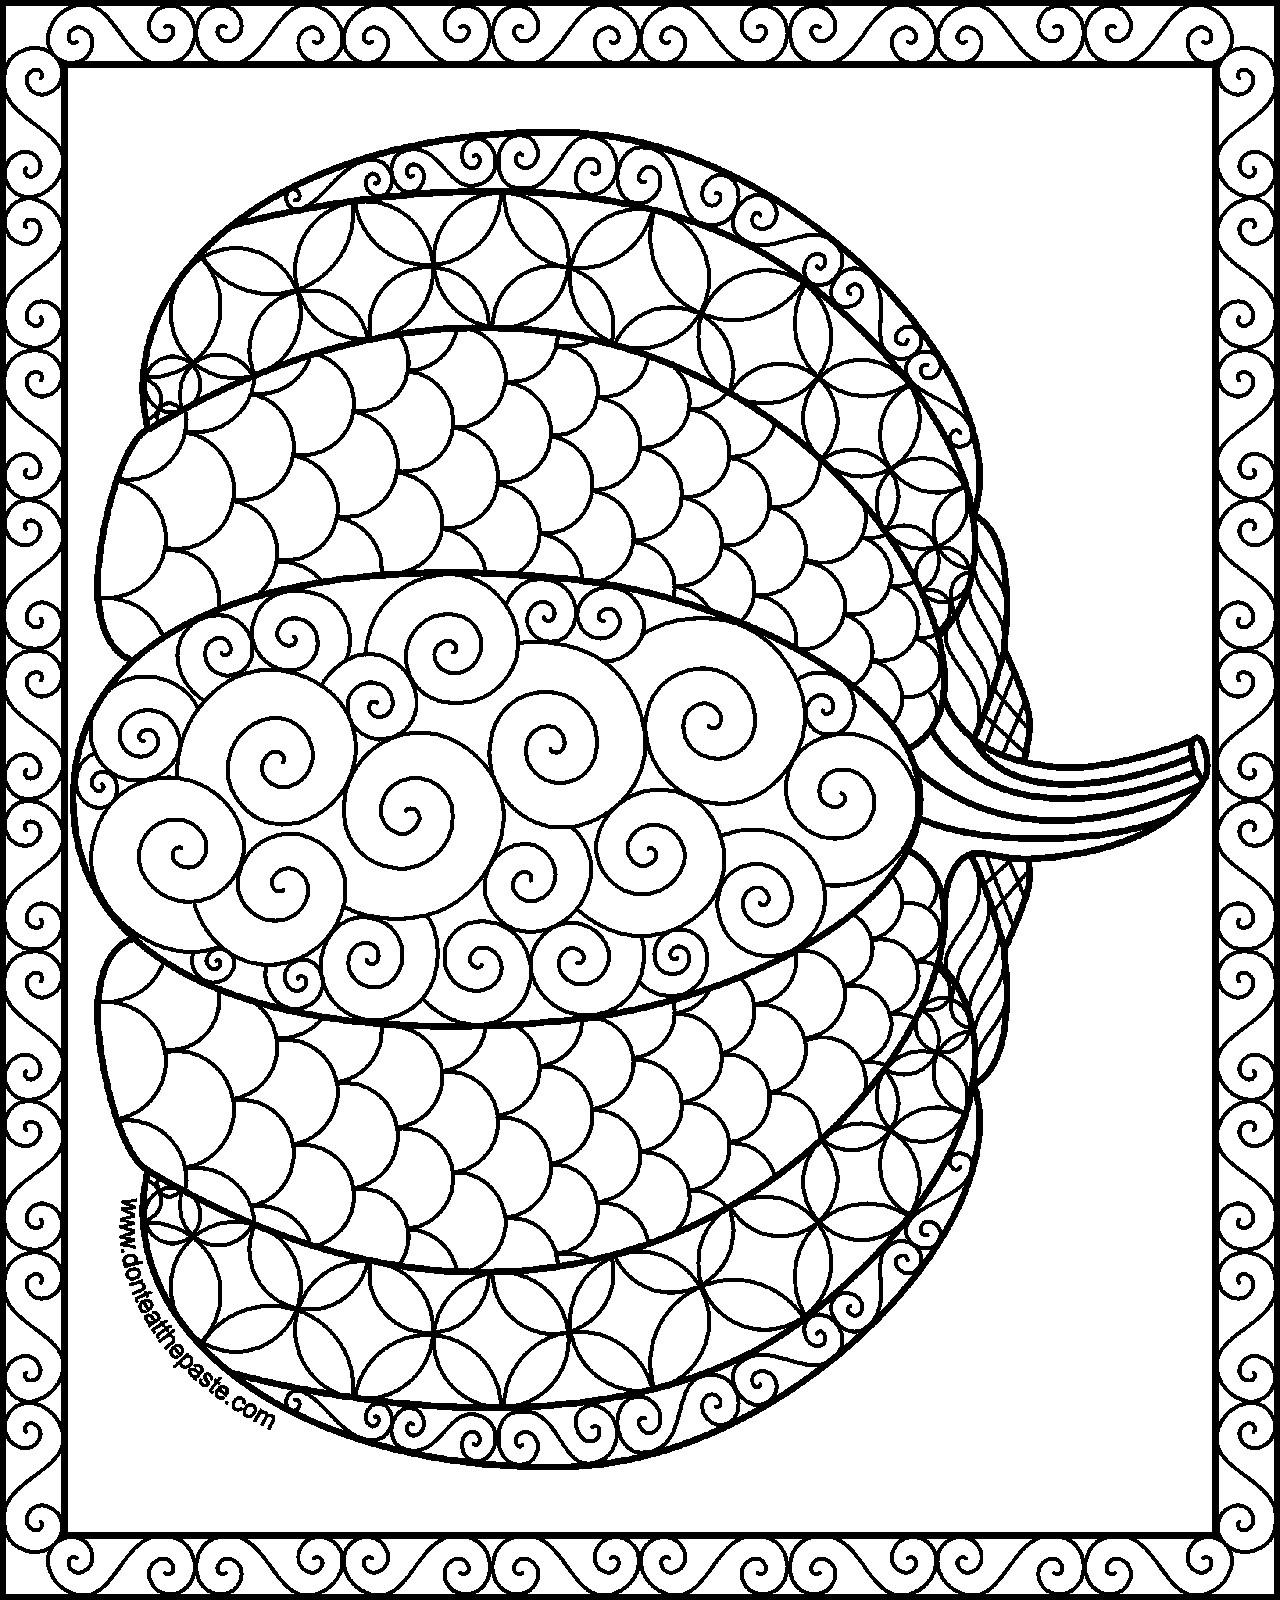 Autumn Adult Coloring Pages at Free printable